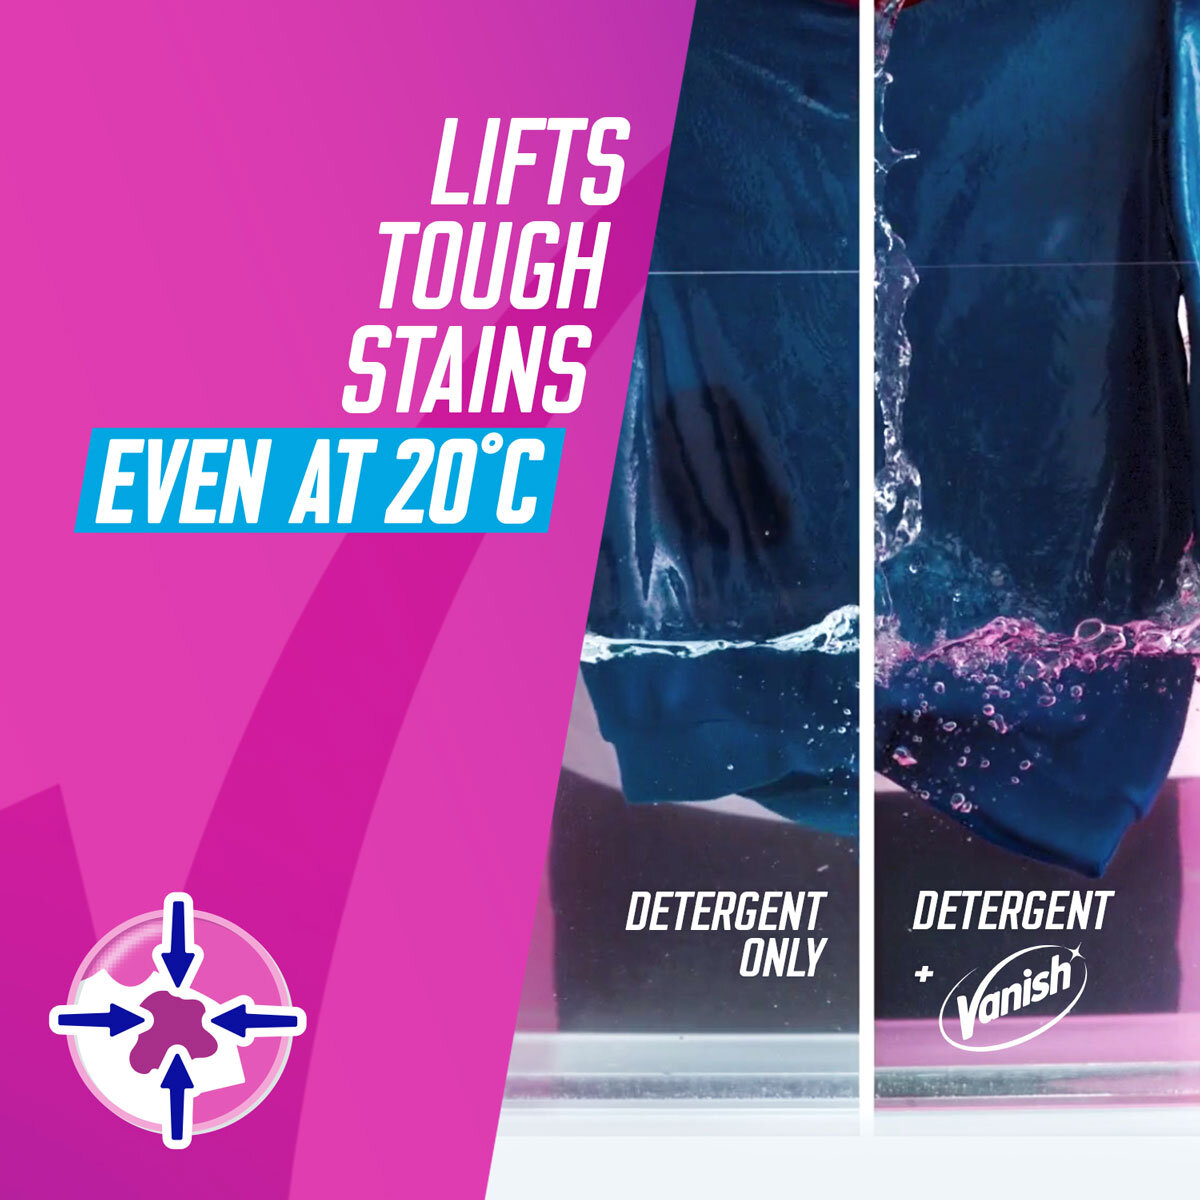 Lifts Tough Stains